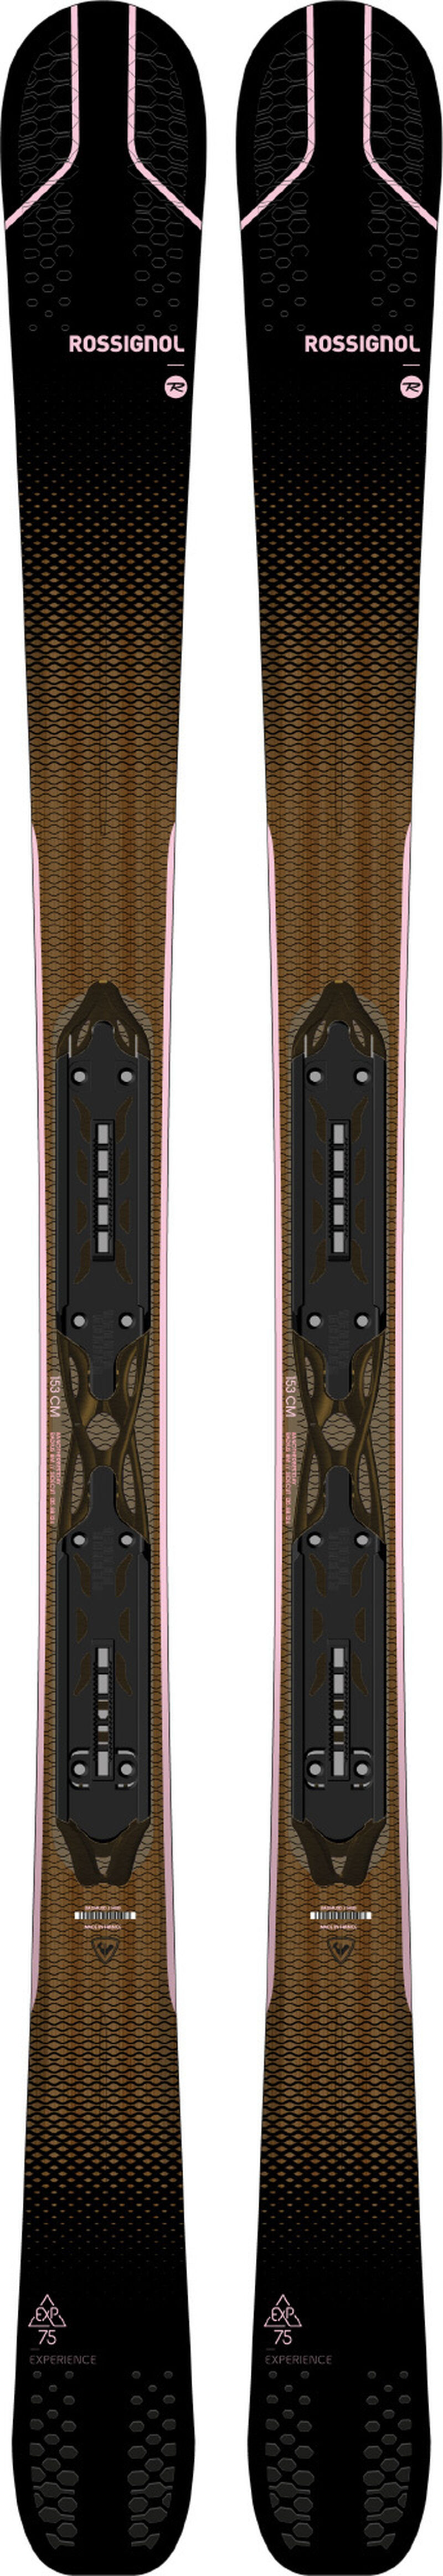 Rossignol Women's All Mountain Skis EXPERIENCE 75 W XPRESS 